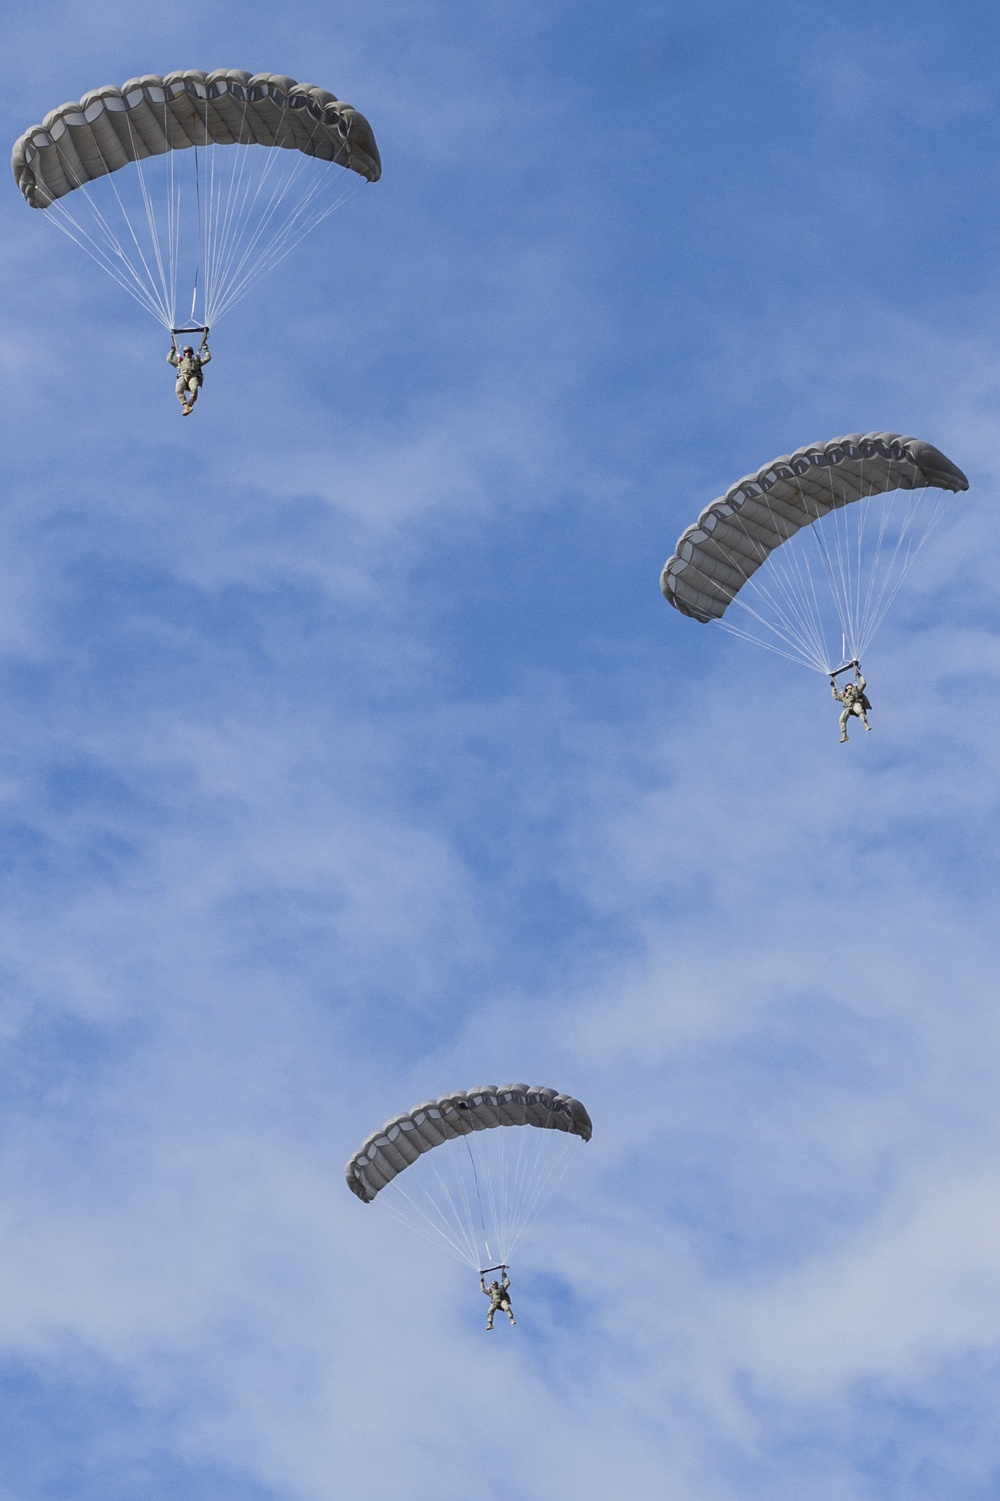 Paratroopers jump in the new RA-1 rig